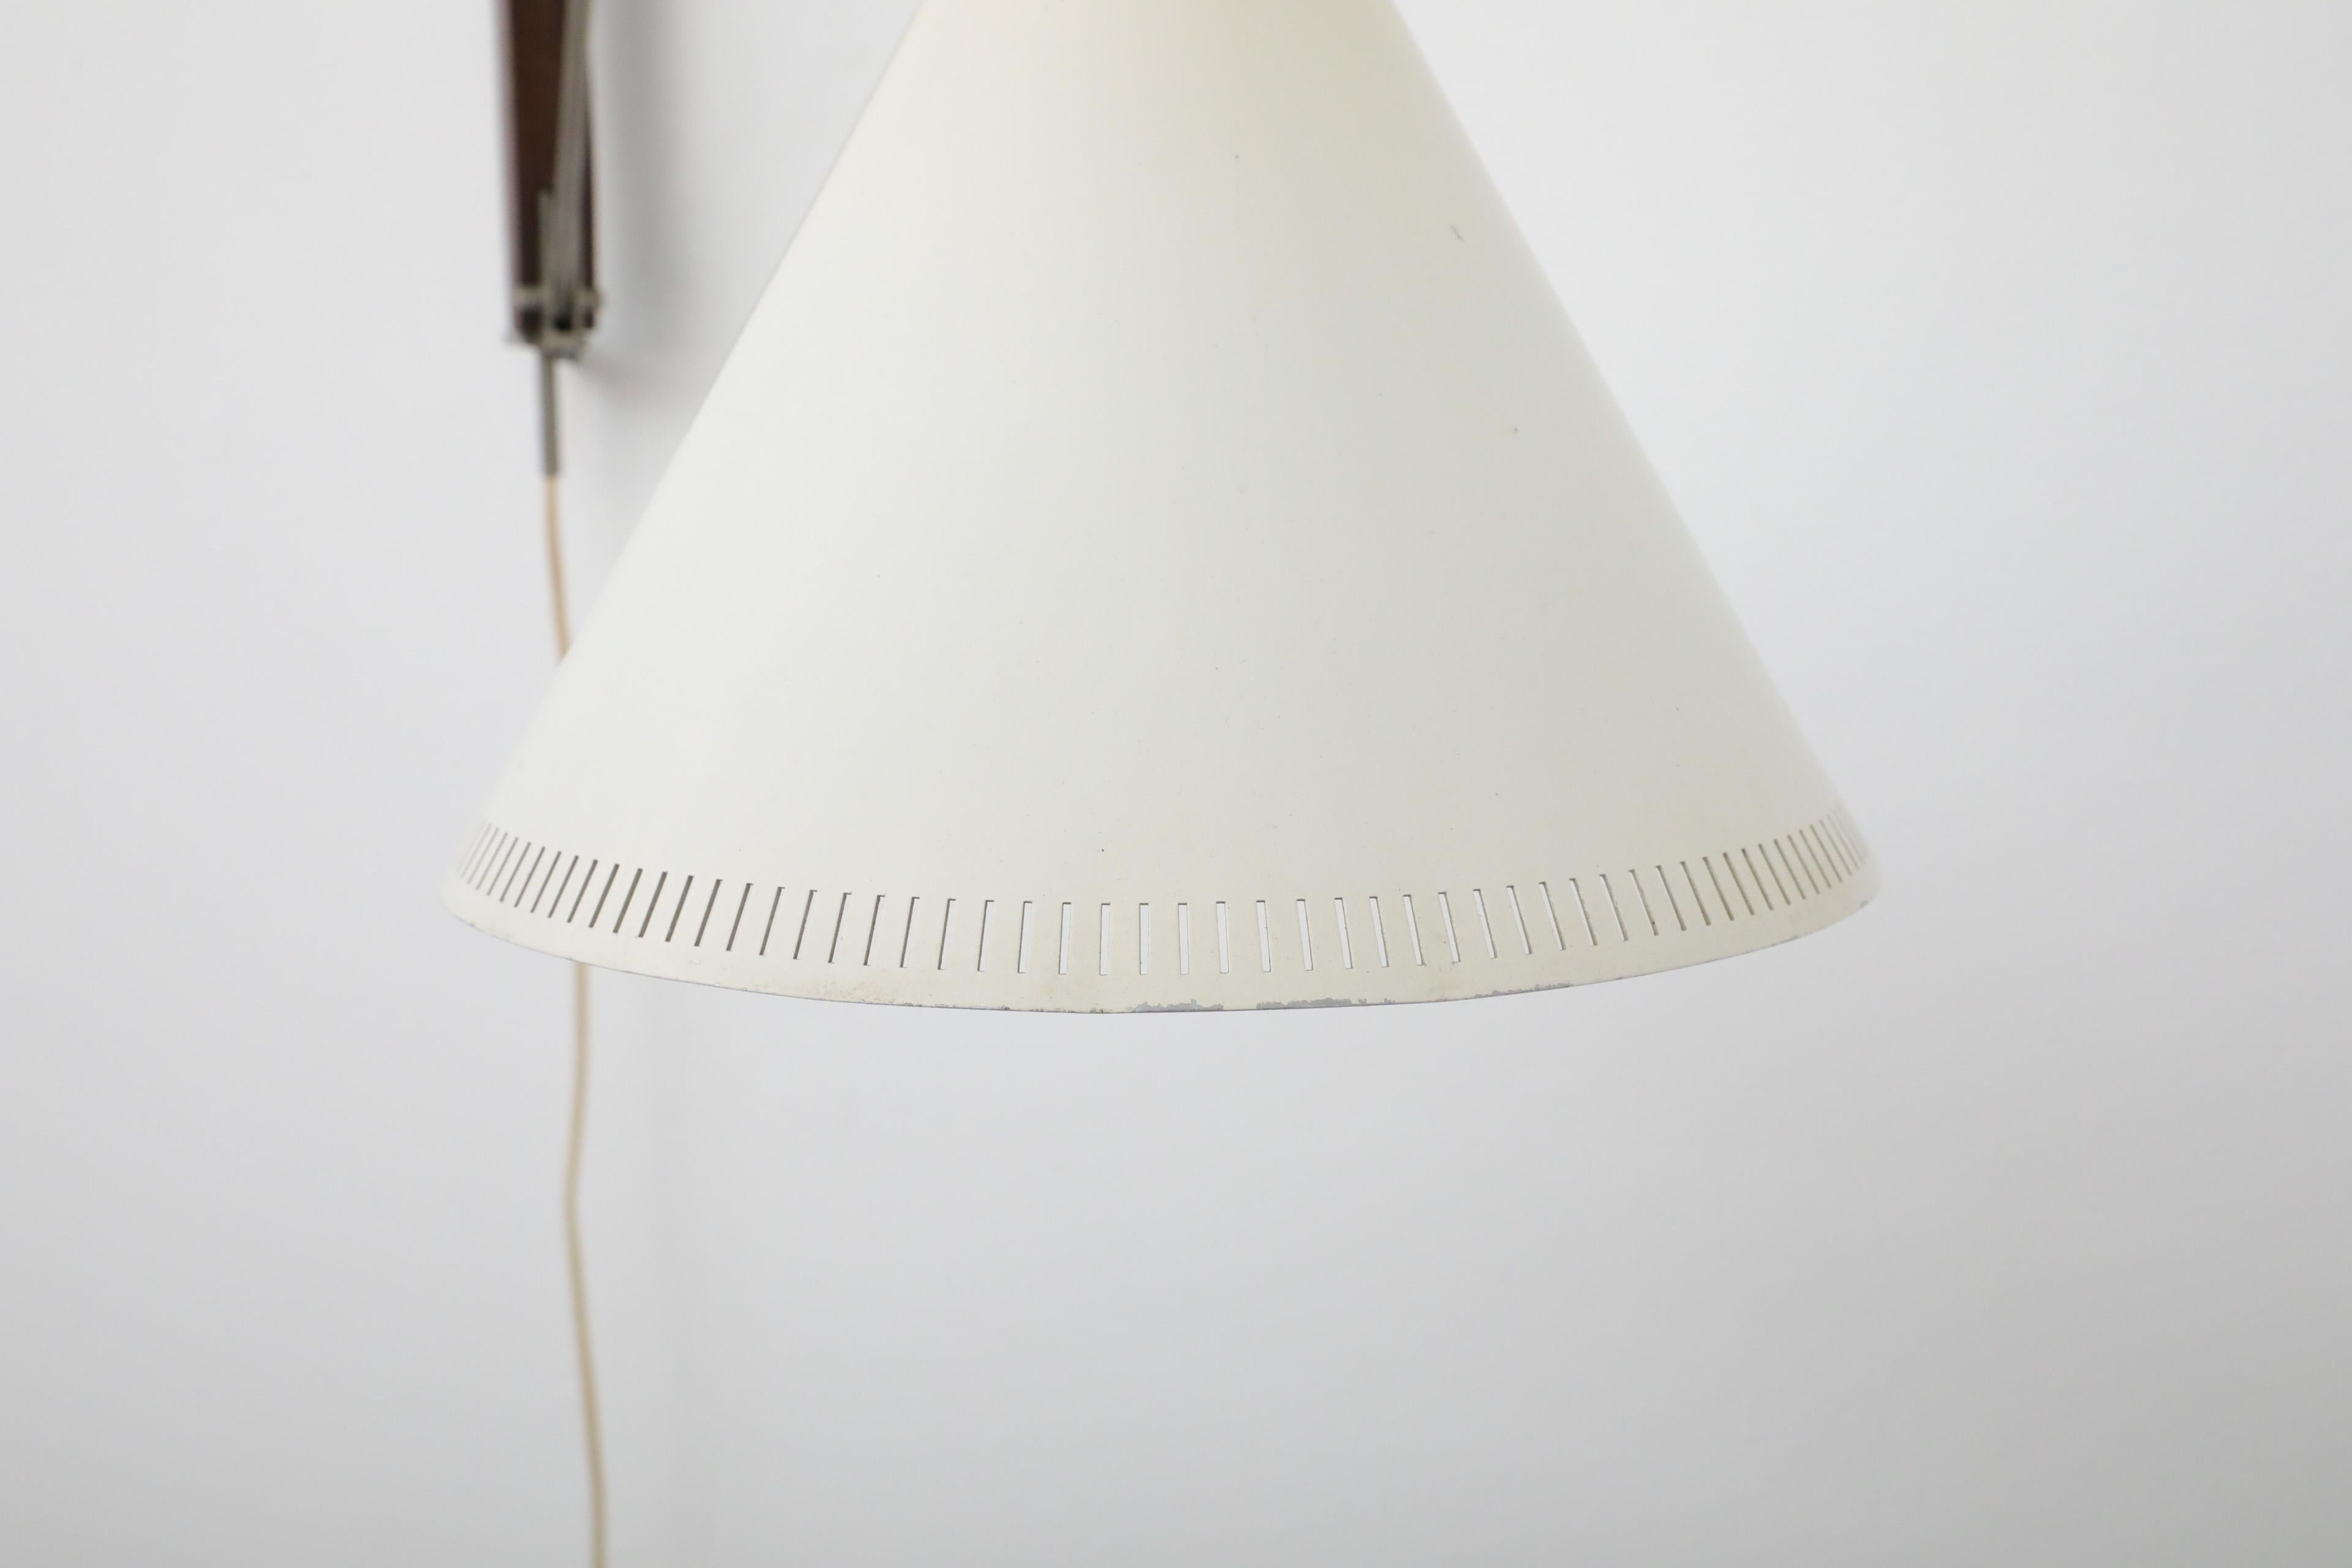 Rare Willem Hagoort Wall Sconce w/ White Enameled Metal Cone Shade & Teak Mount For Sale 9